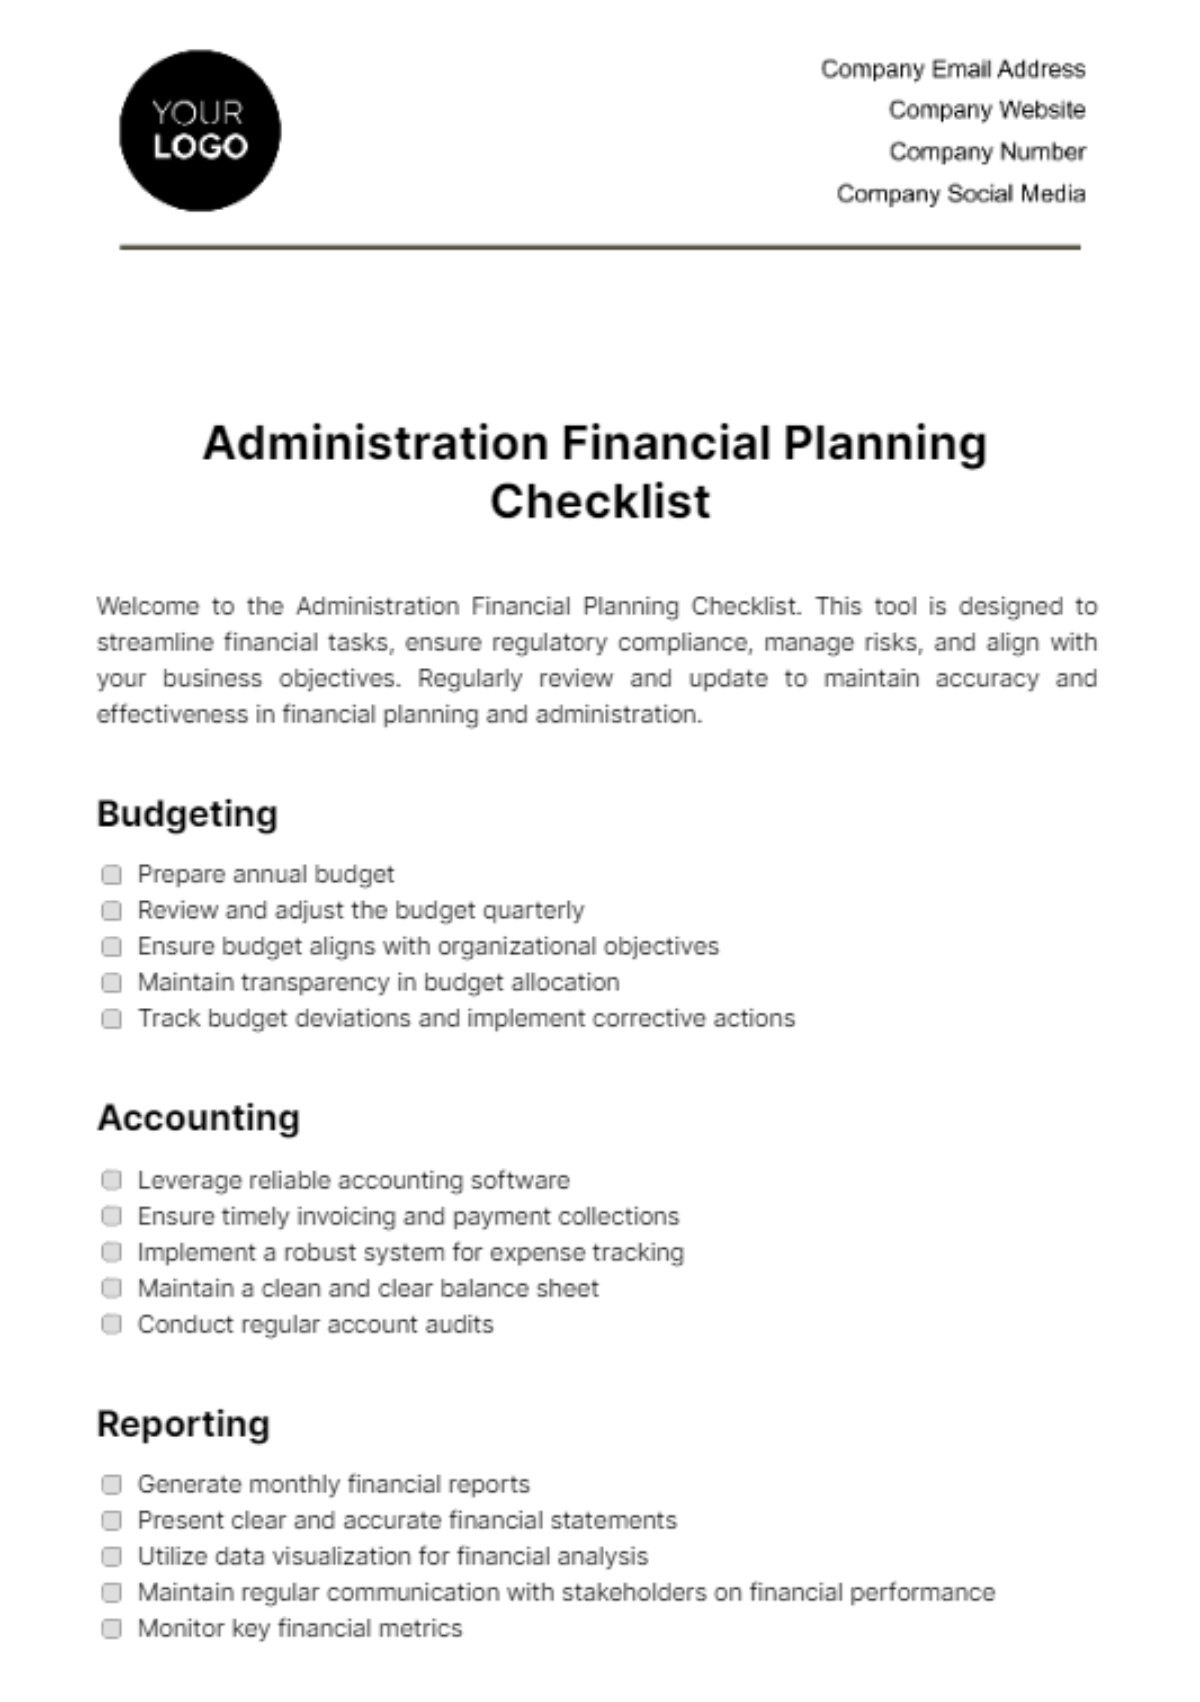 Free Administration Financial Planning Checklist Template